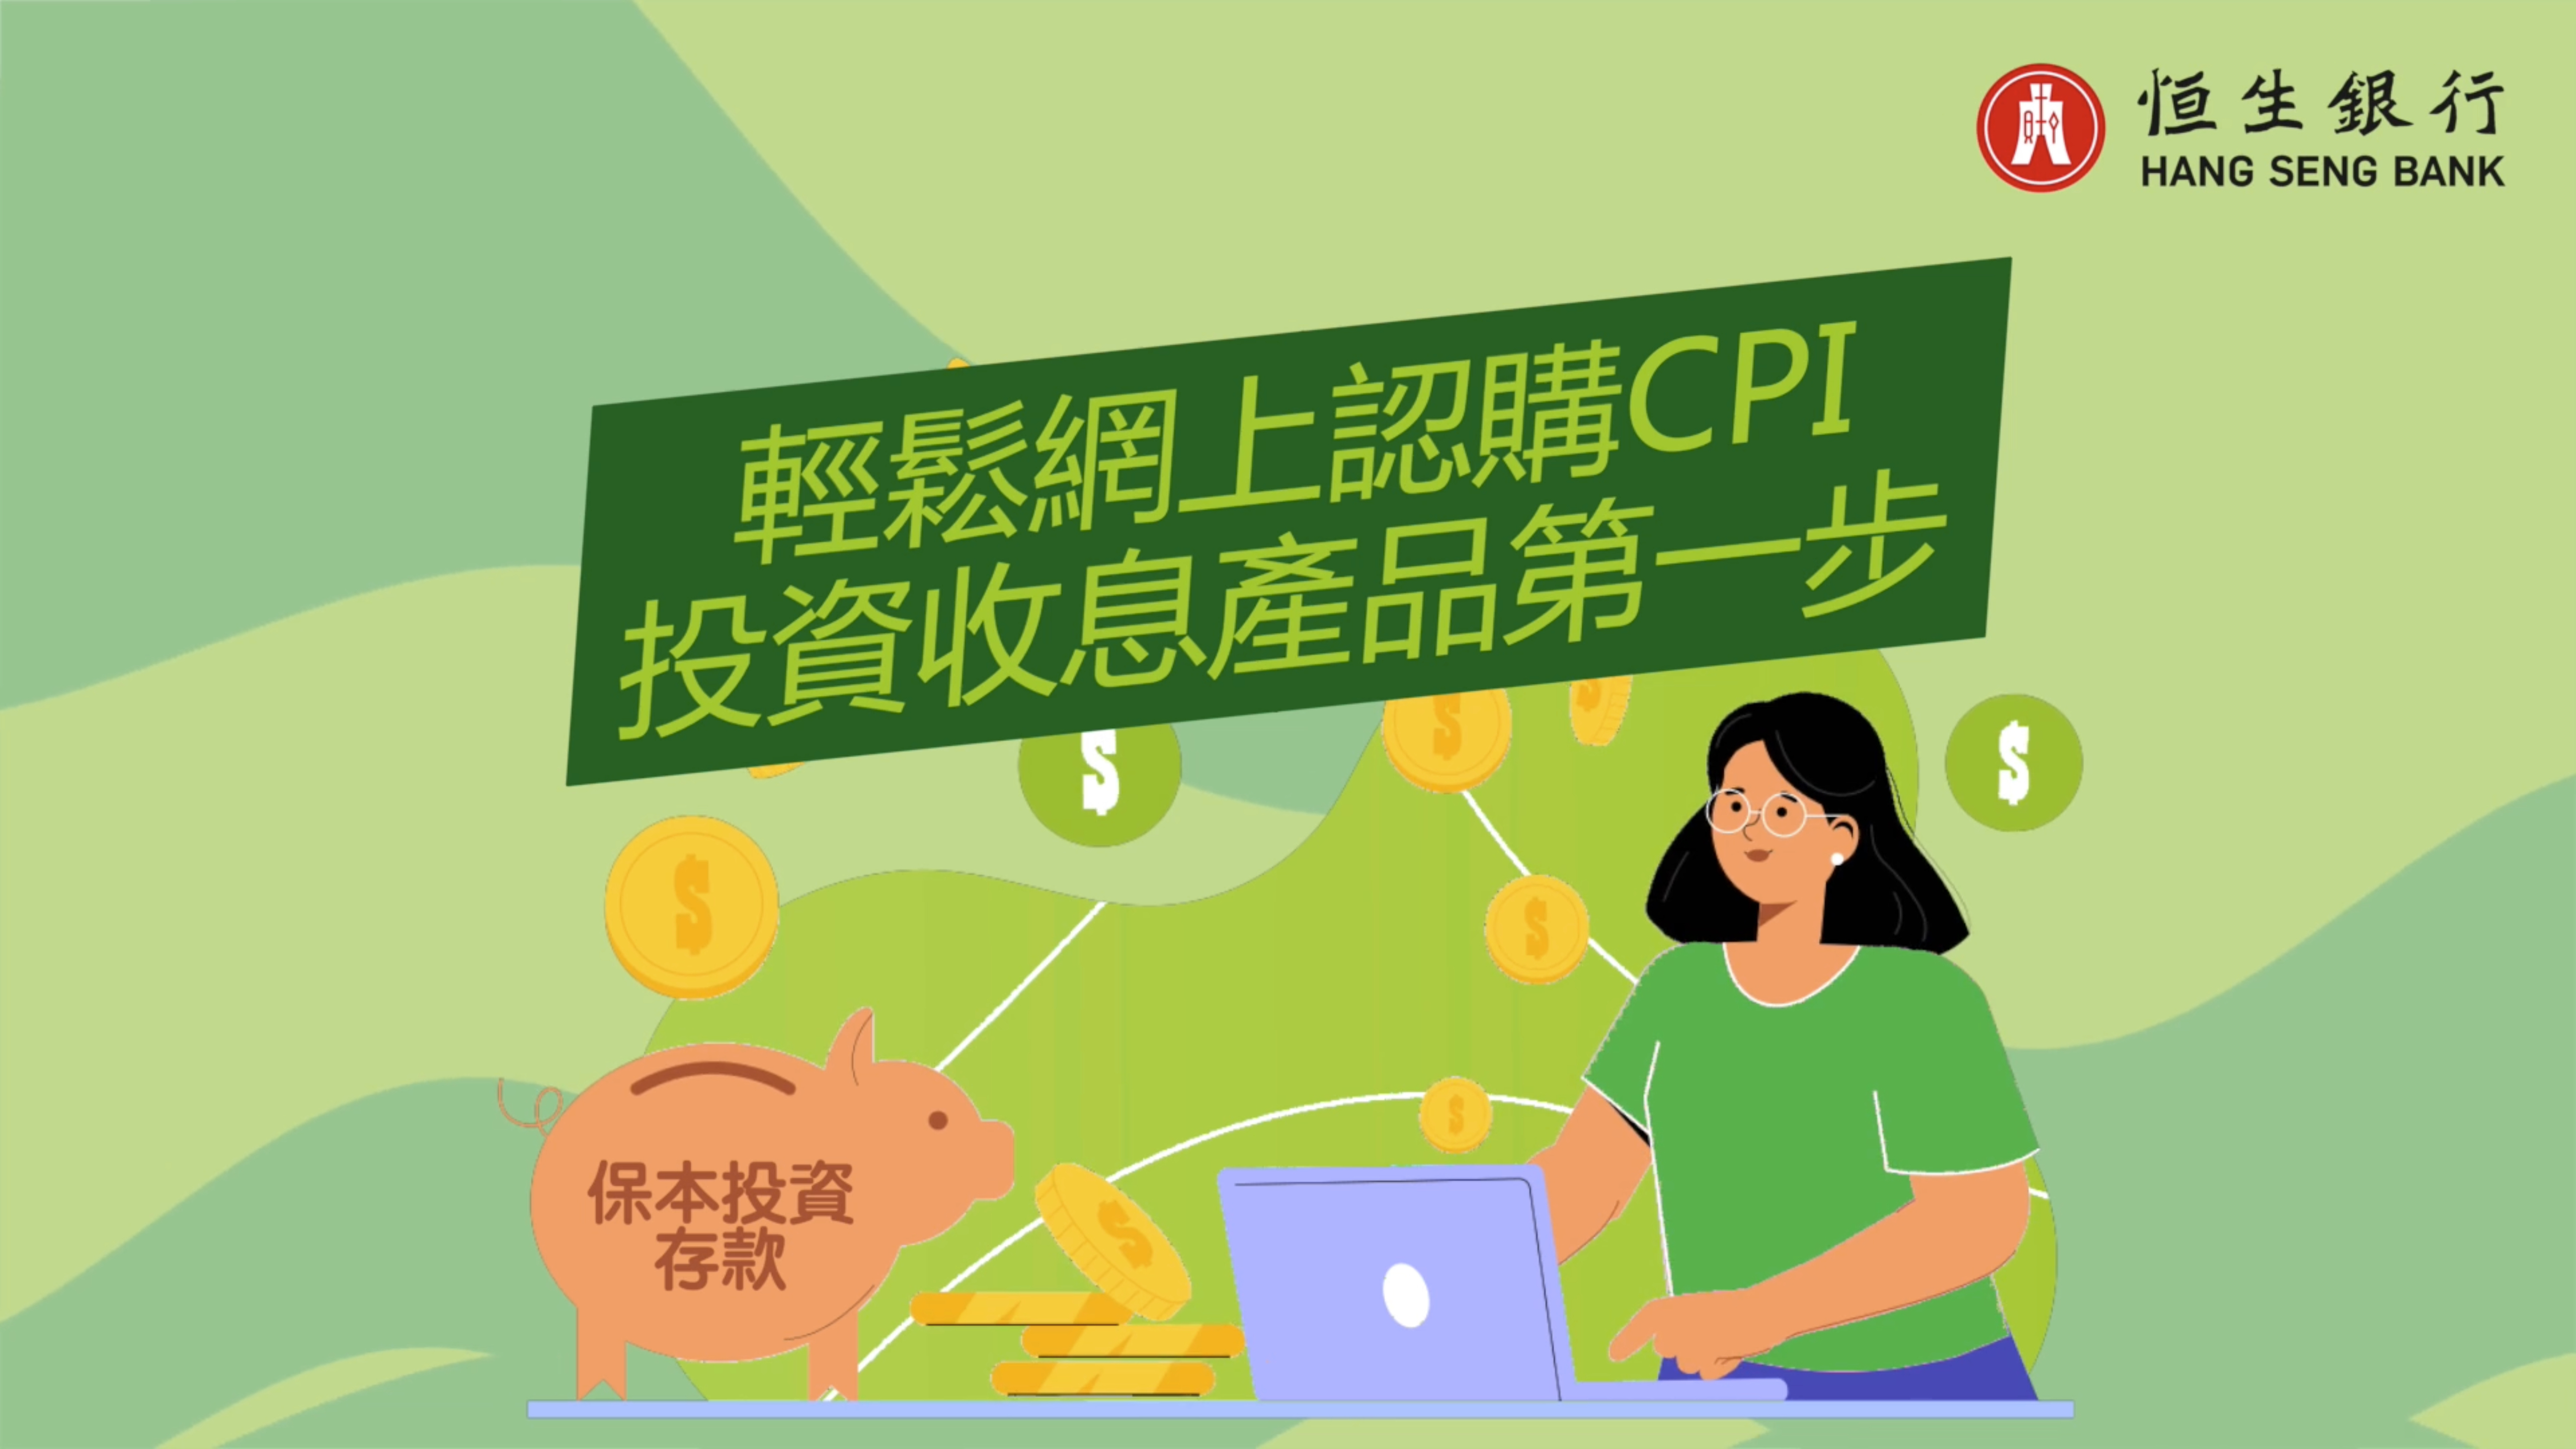 Easy Steps to Subscribe Online for Capital Protected Investment (CPI) (Cantonese version)